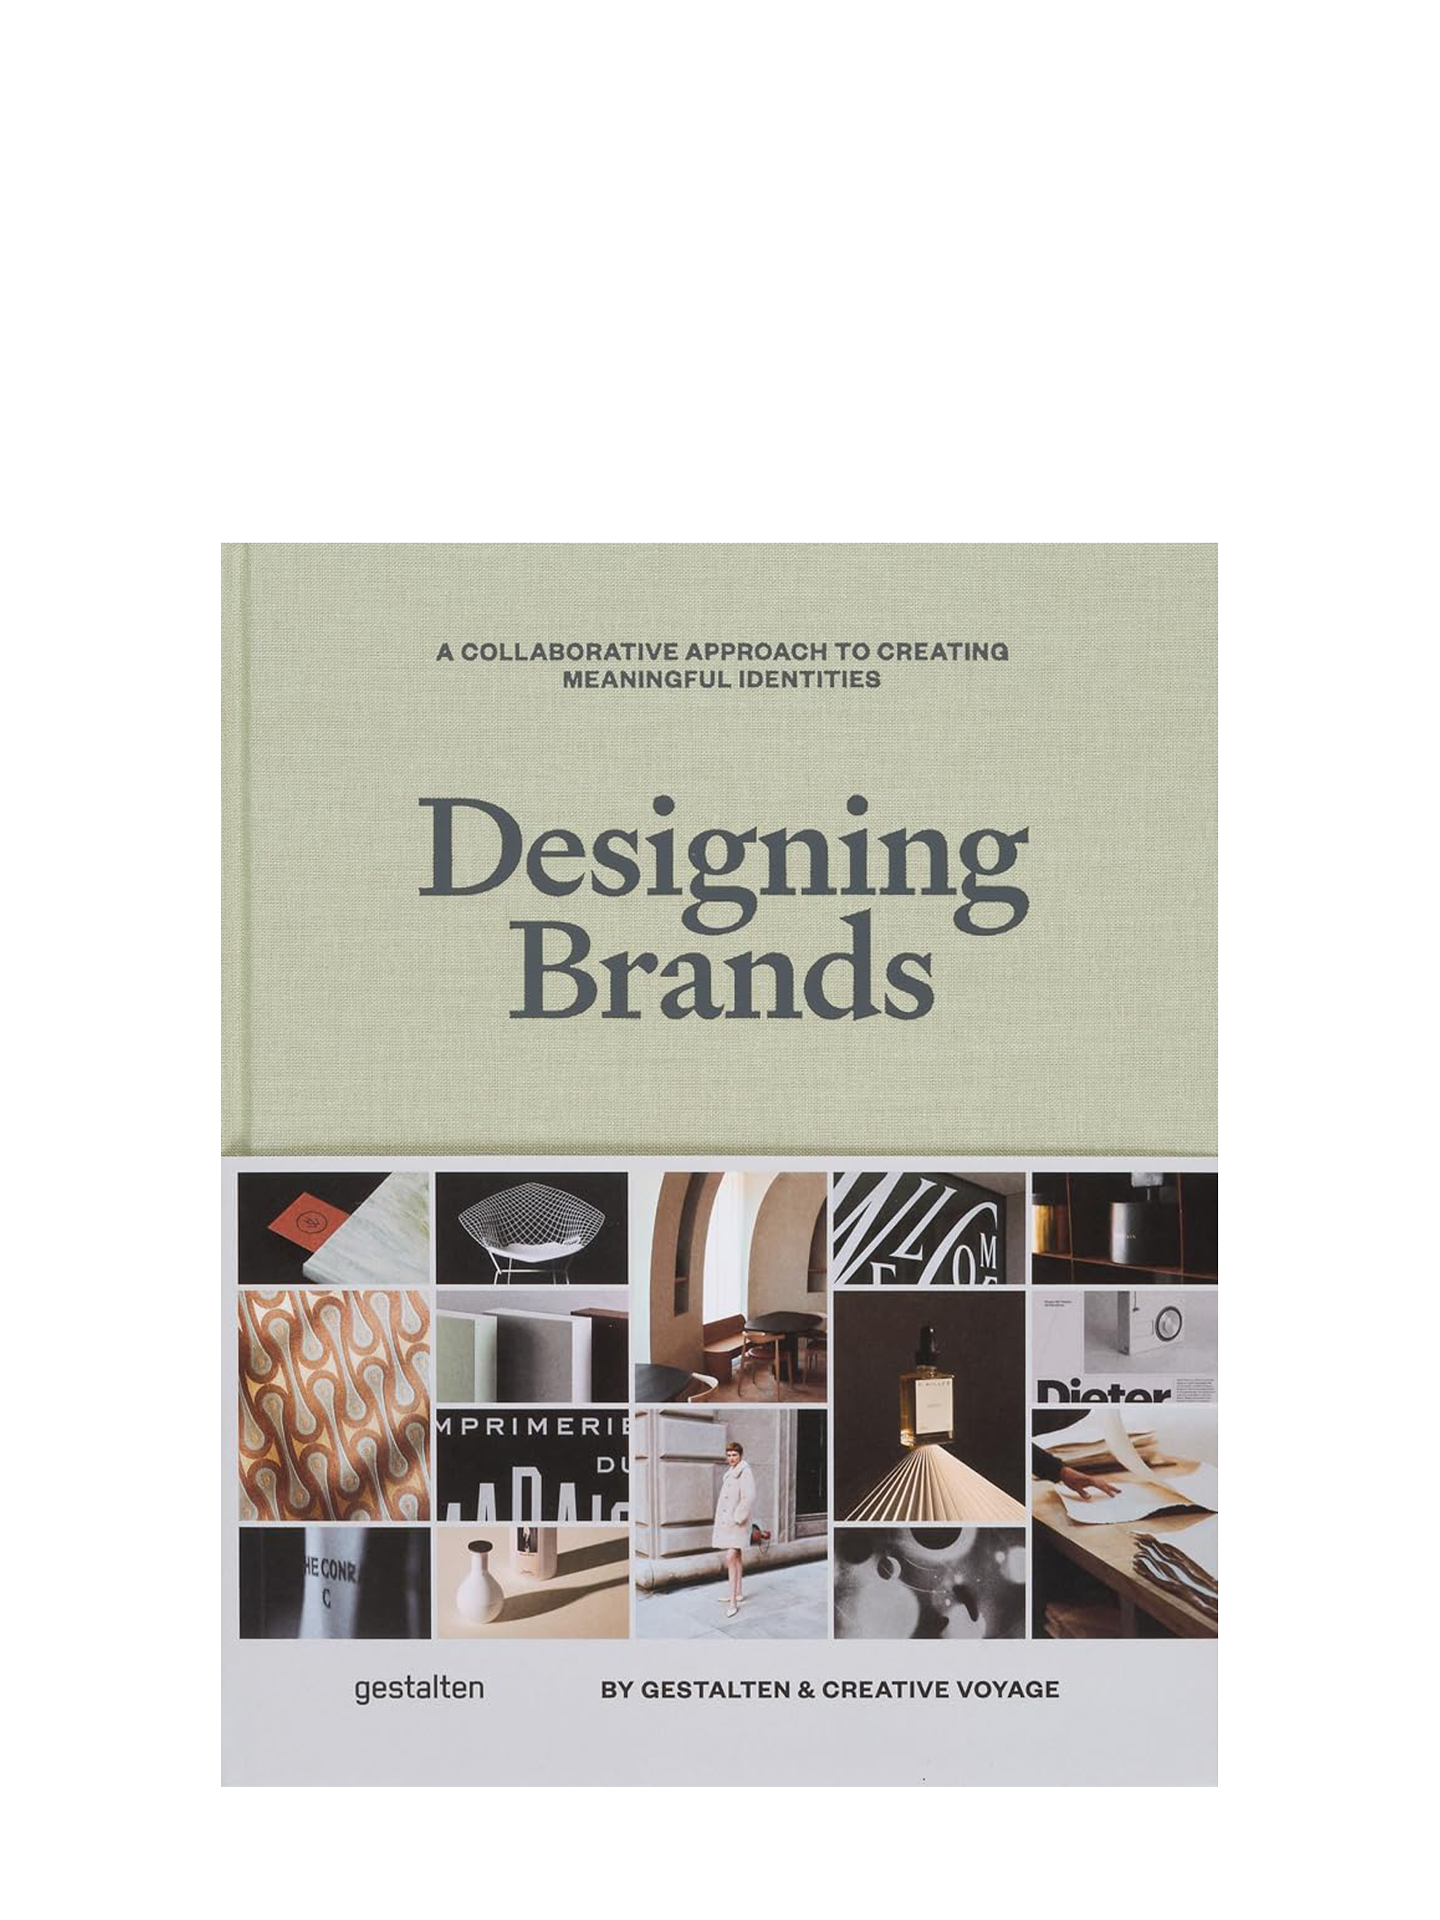 Designing Brands — A Collaborative Approach to Creating Meaningful Brand Identities